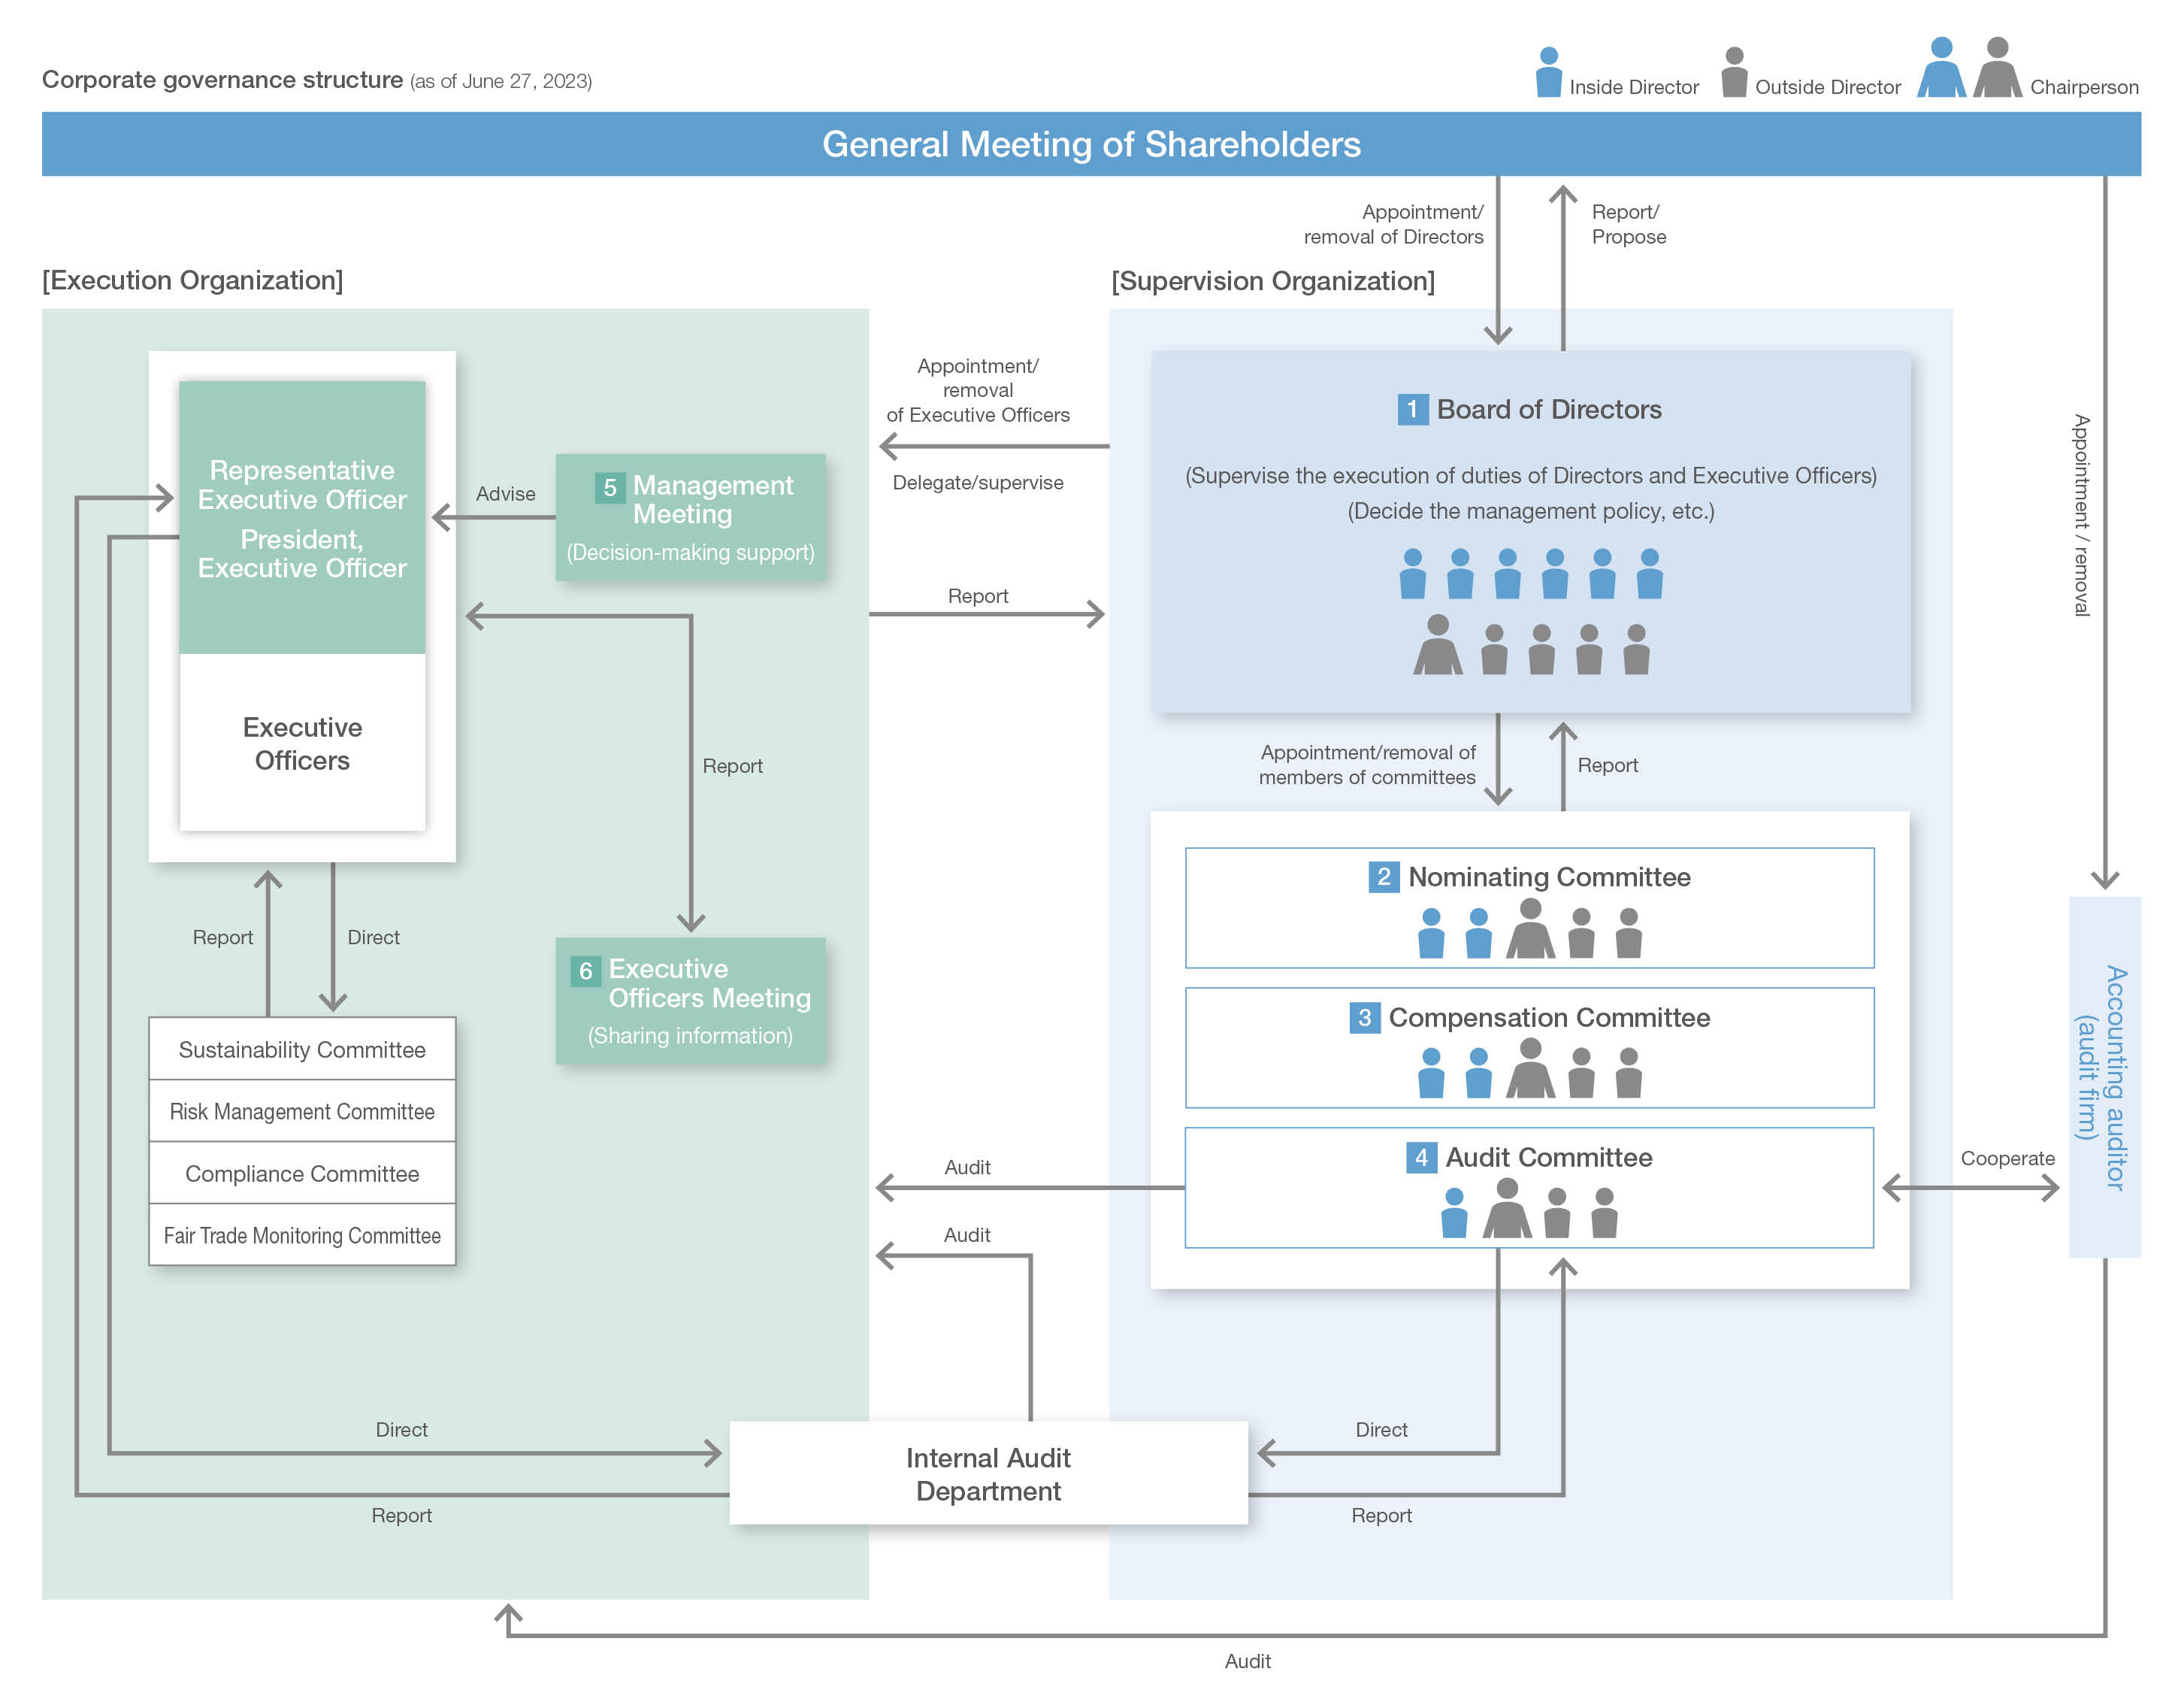 Corporate governance structure(as of June 27, 2023)